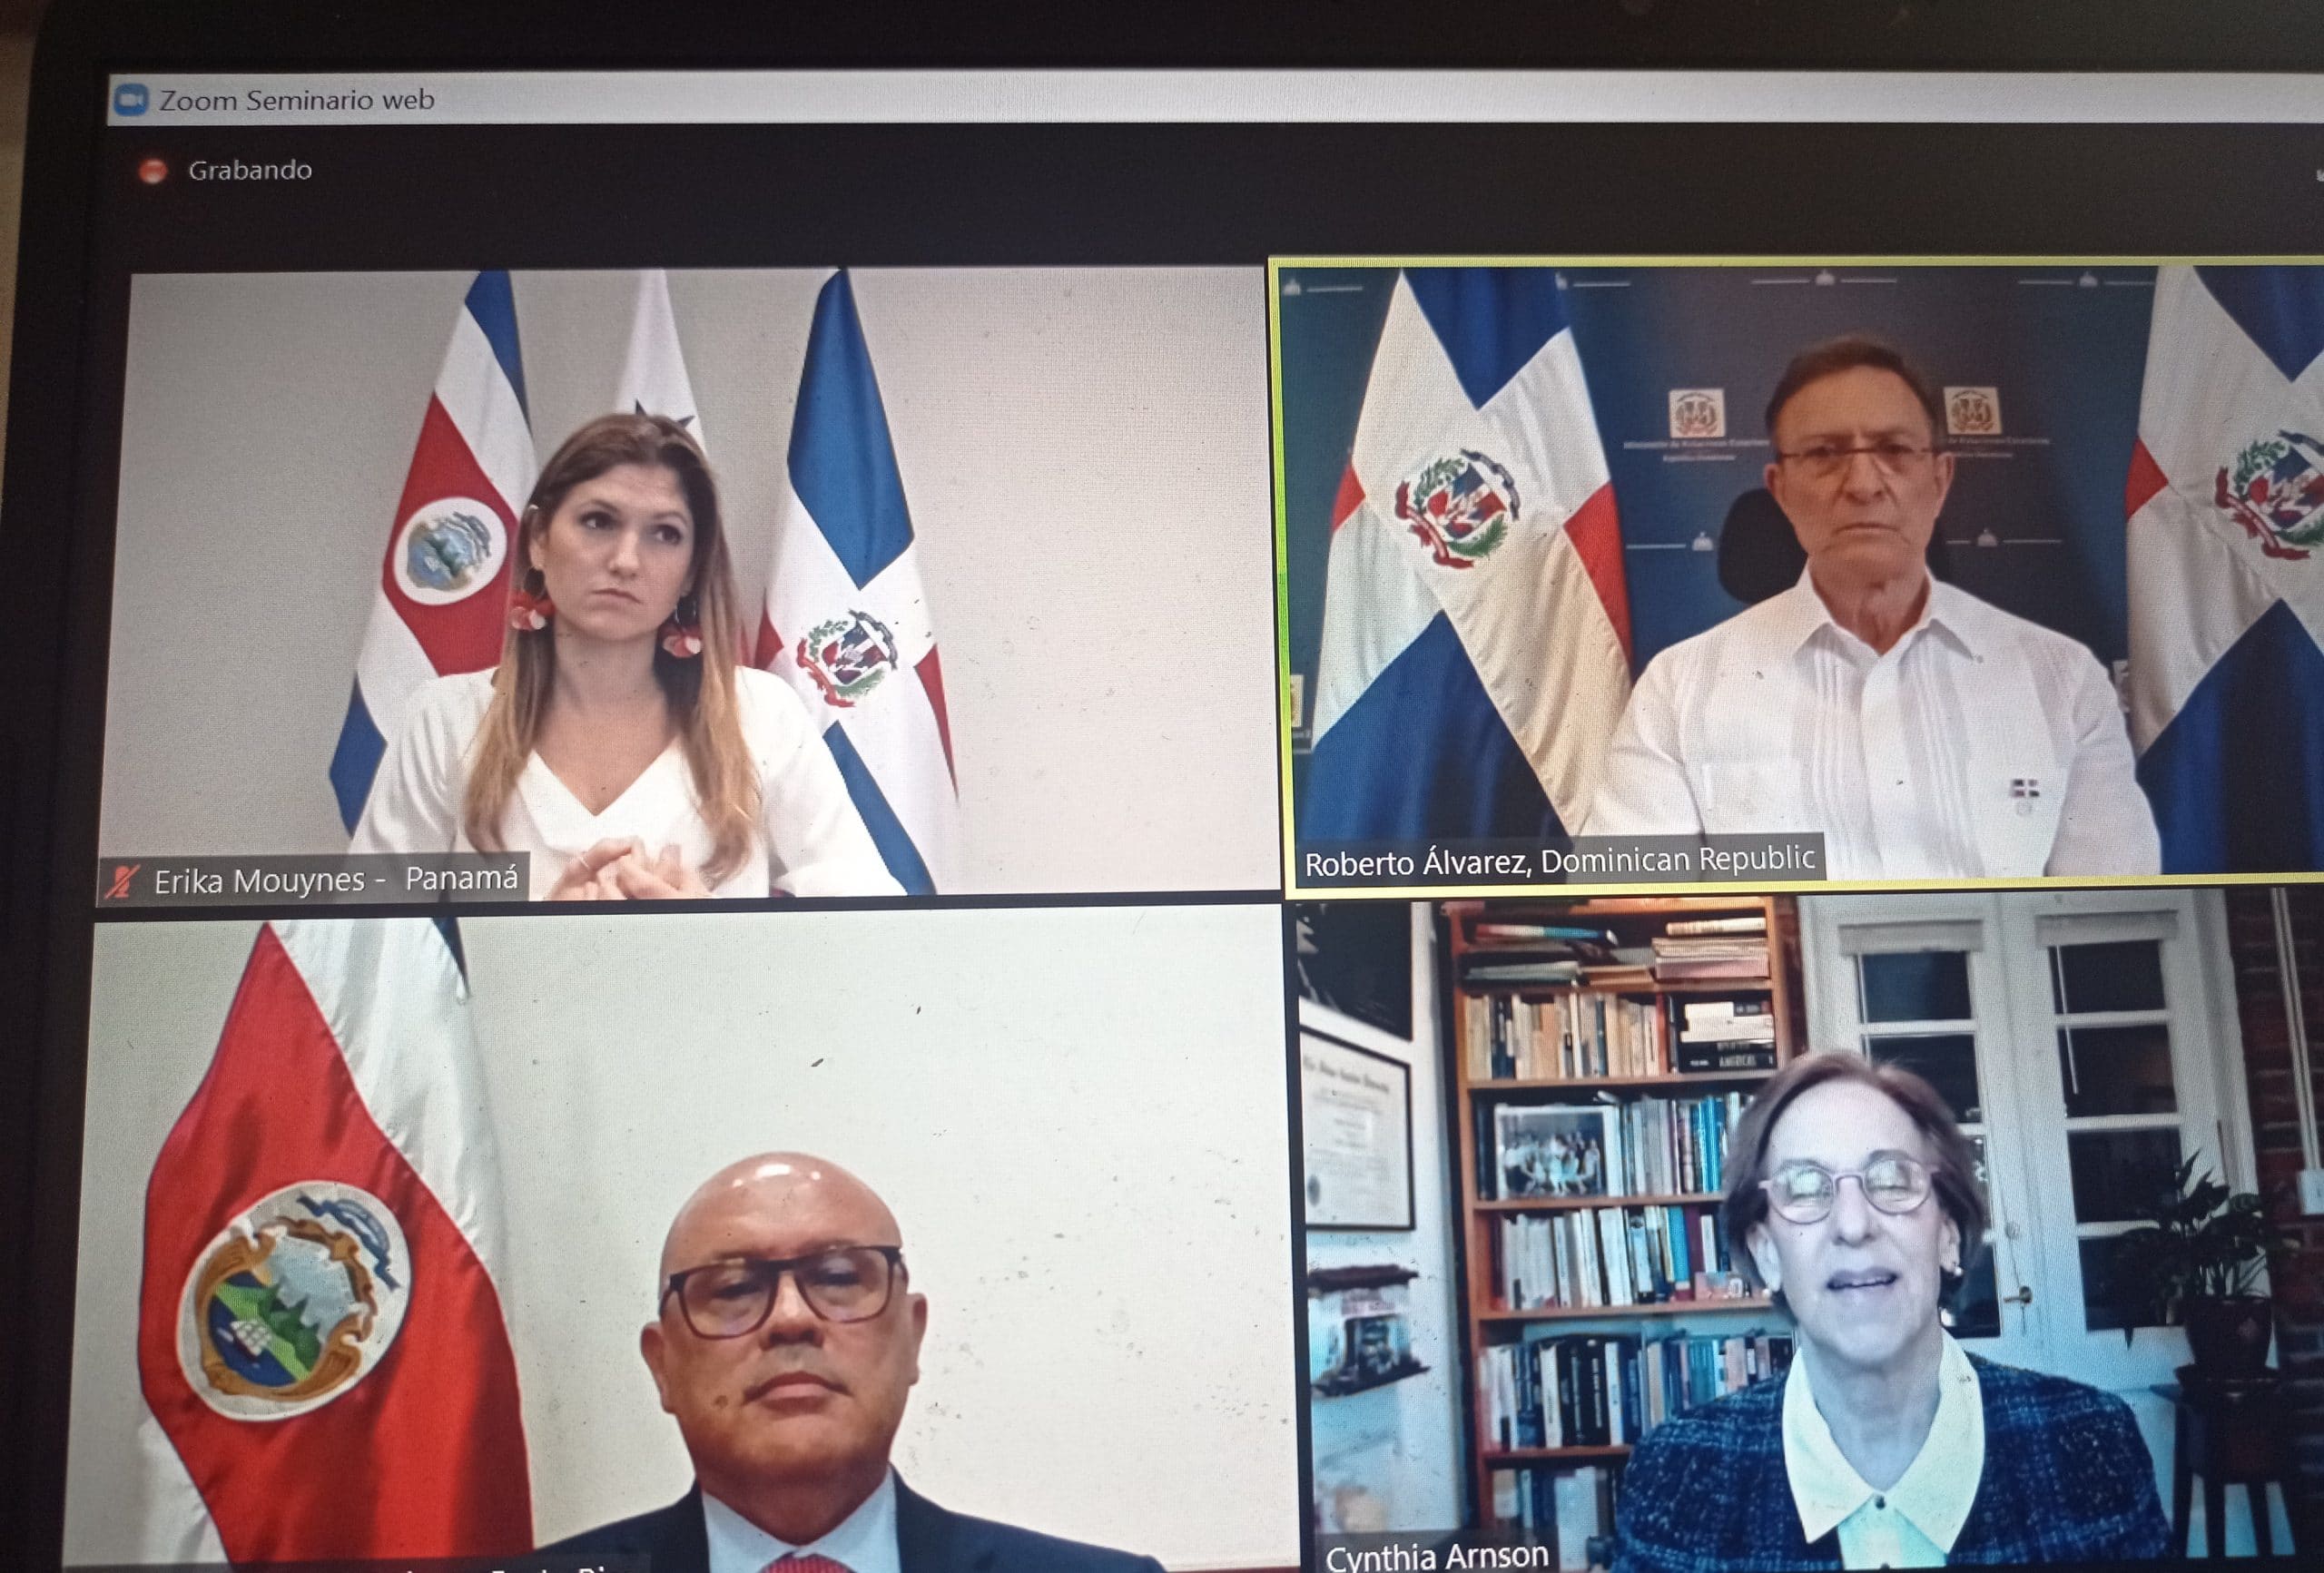 Costa Rica, Panama, and the Dominican Republic: Nicaragua's crisis is an “urgent priority” in the region